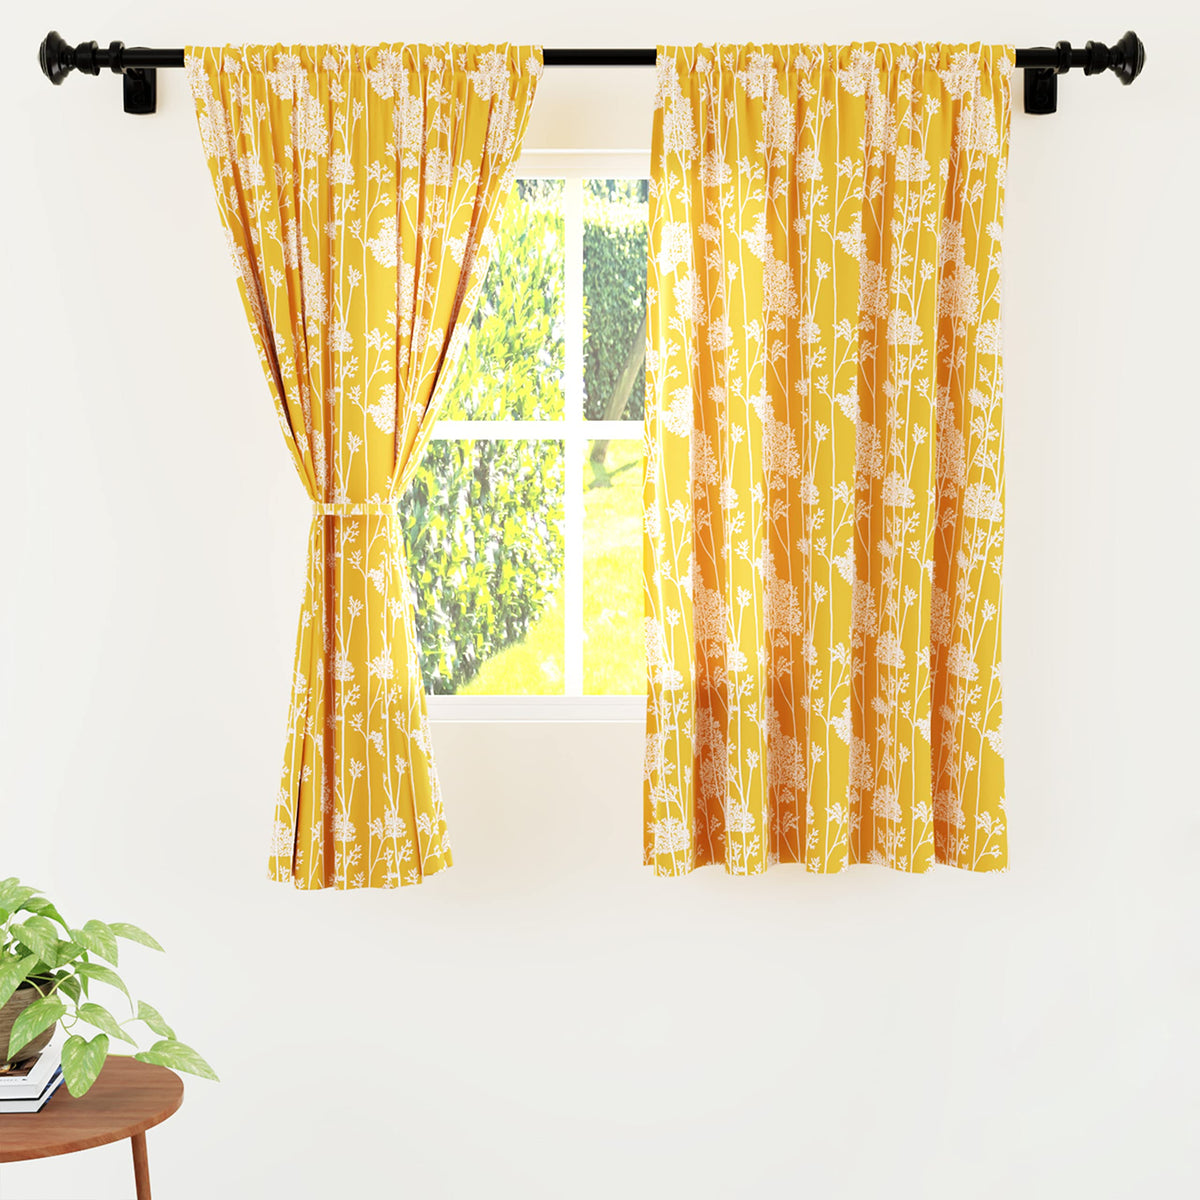 Encasa Homes Polyester Printed Window Curtain for 5 ft with Tie Back, Rod Pocket, Light-Filtering, Curtains for Kitchen, Bedroom, Living Room (142x150 cm), Mango Blotch, Set of 2